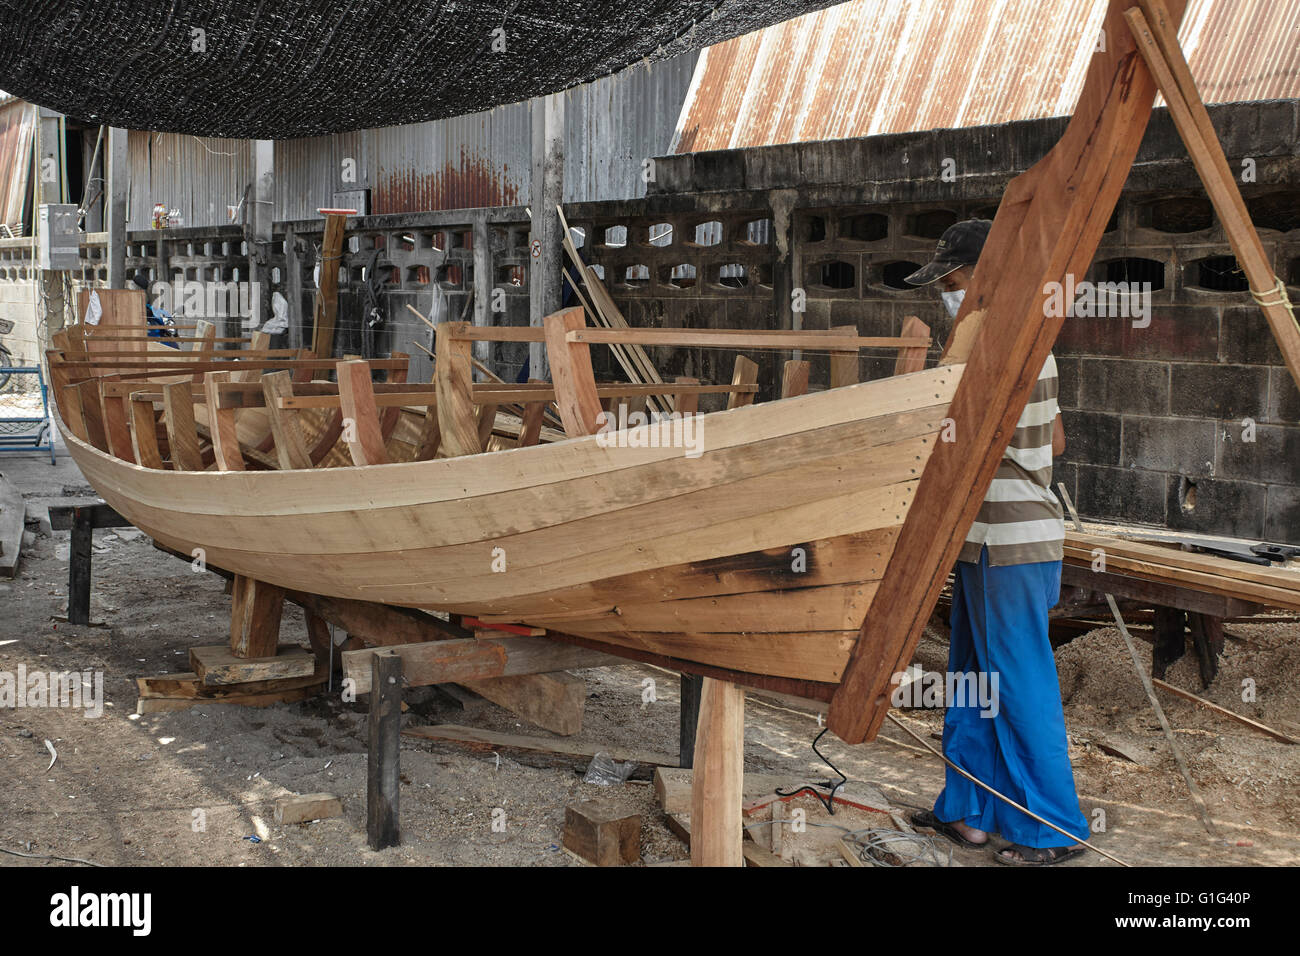 thai craftsman building a traditional wooden boat